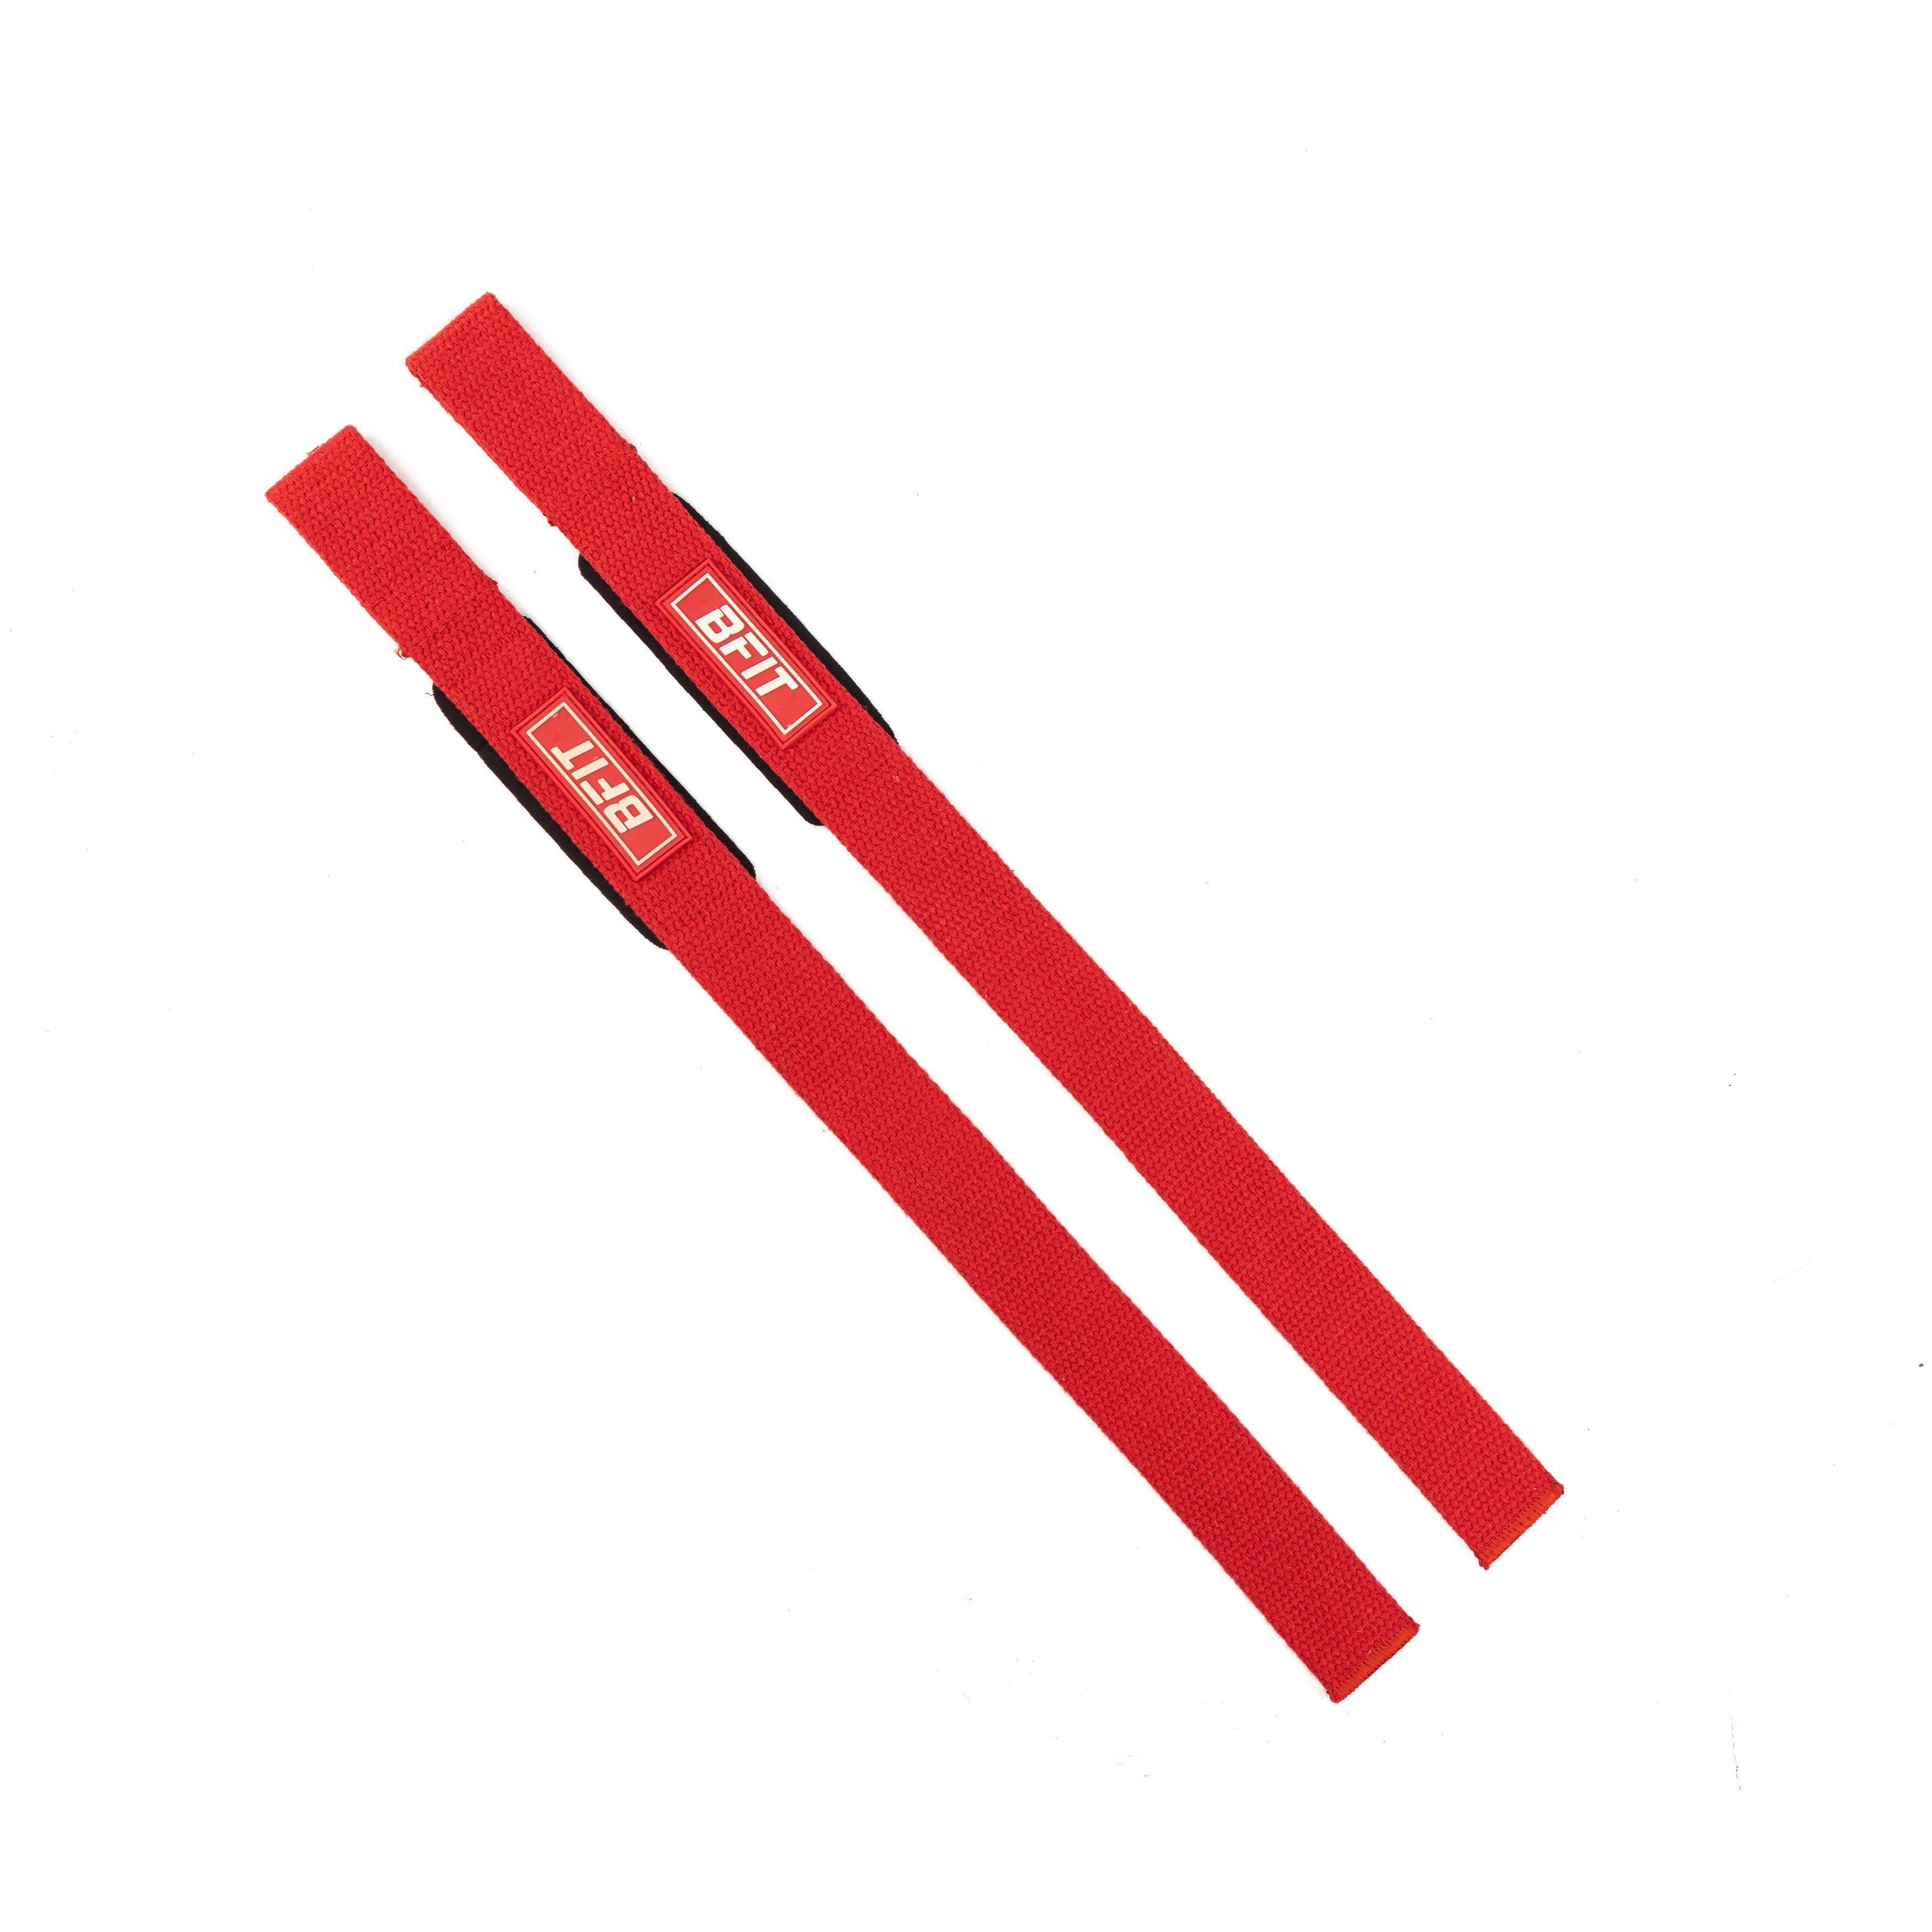 Bfit Lifting Strap - Red